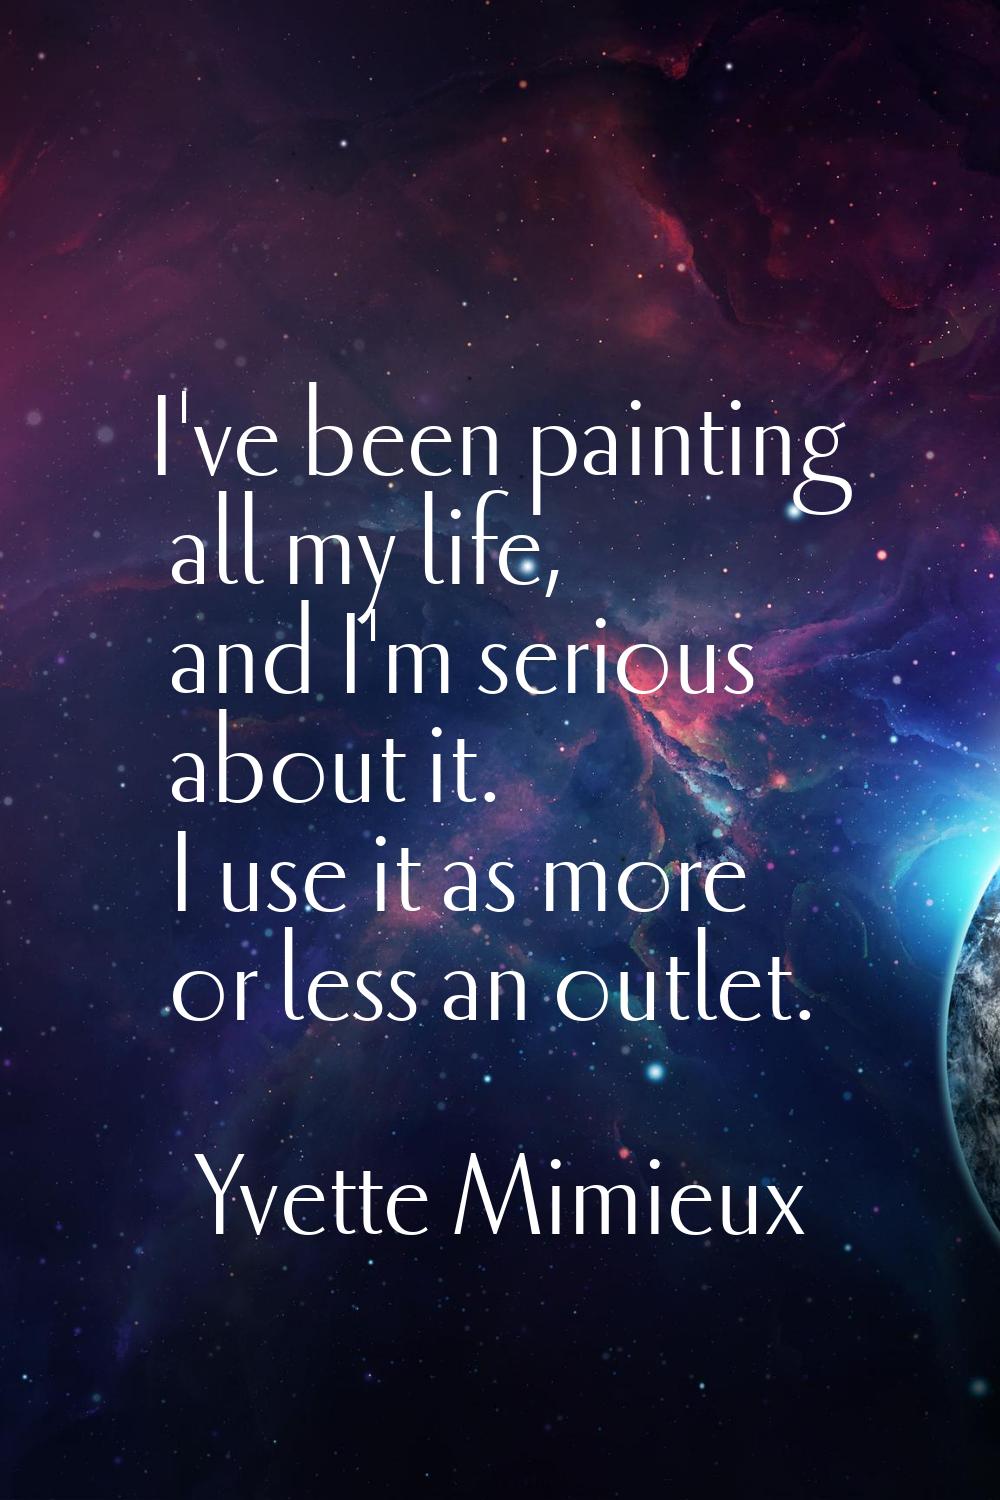 I've been painting all my life, and I'm serious about it. I use it as more or less an outlet.